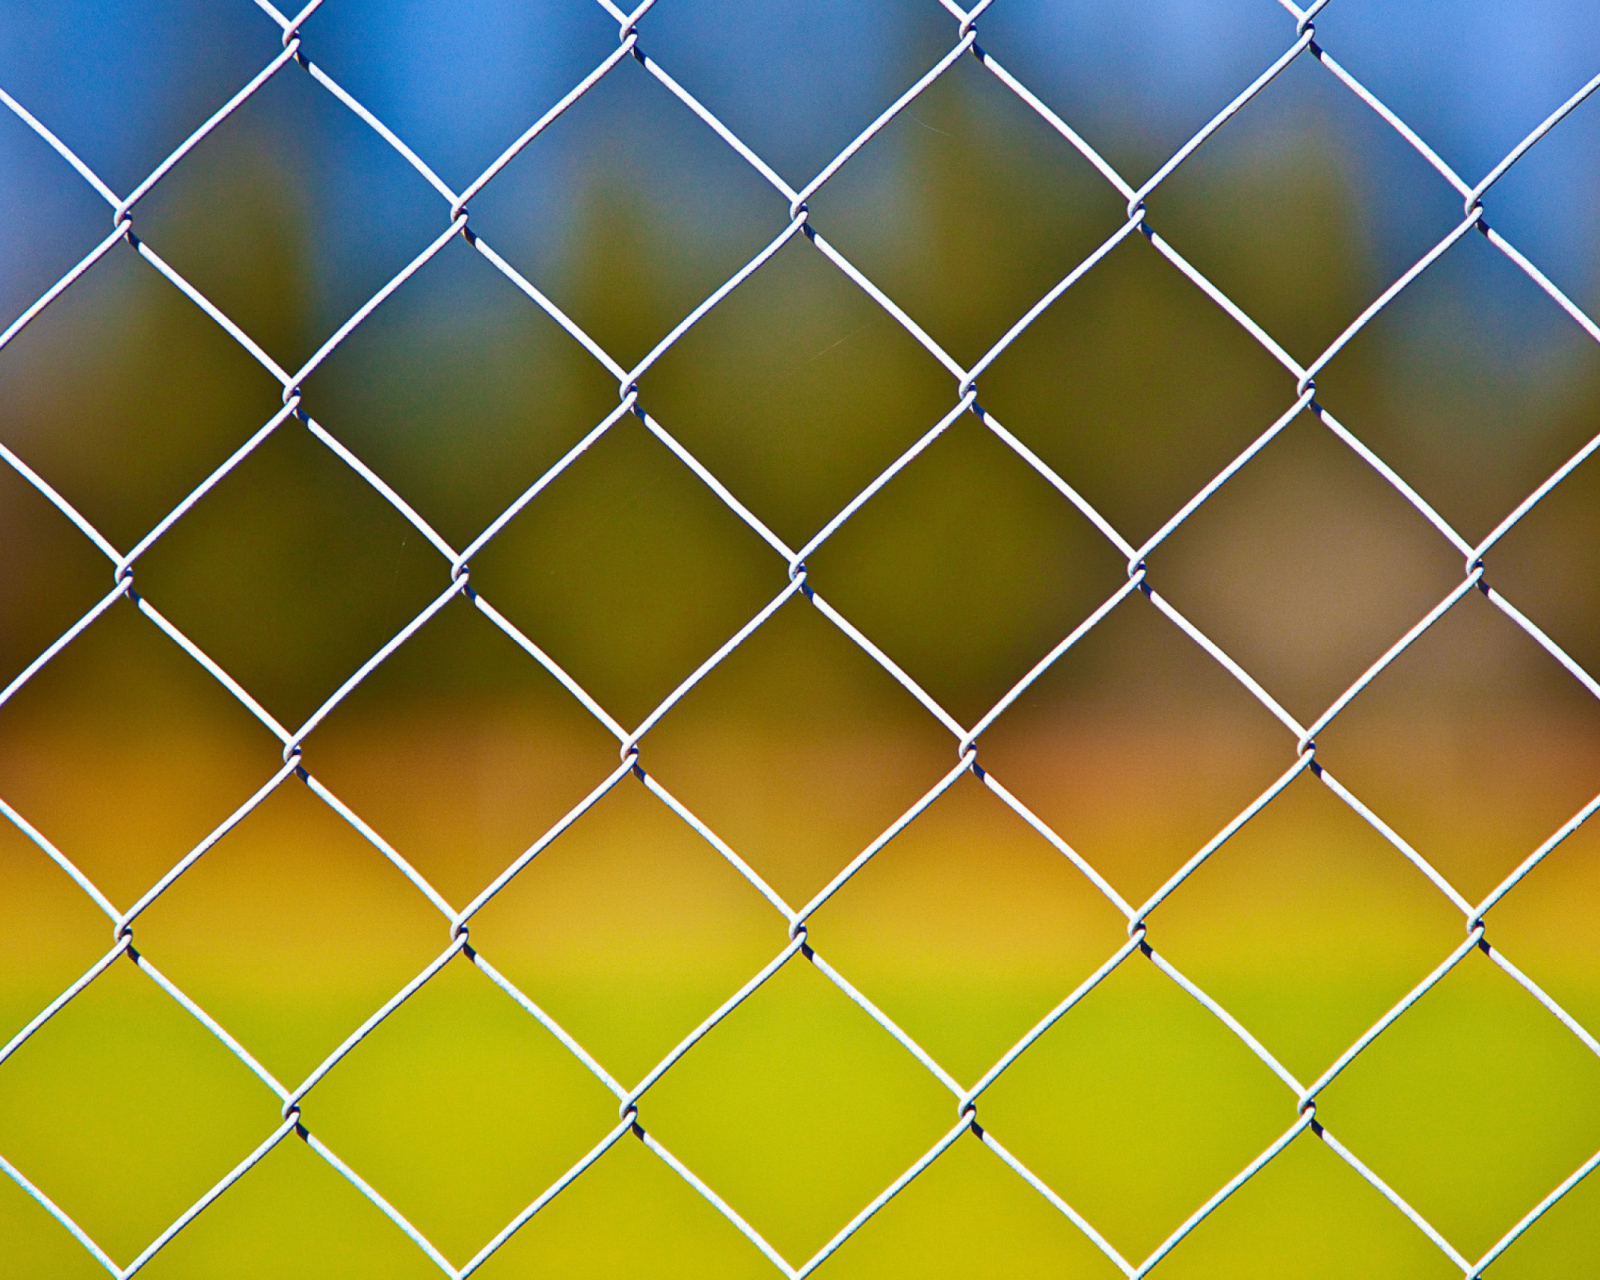 Cage Fence wallpaper 1600x1280